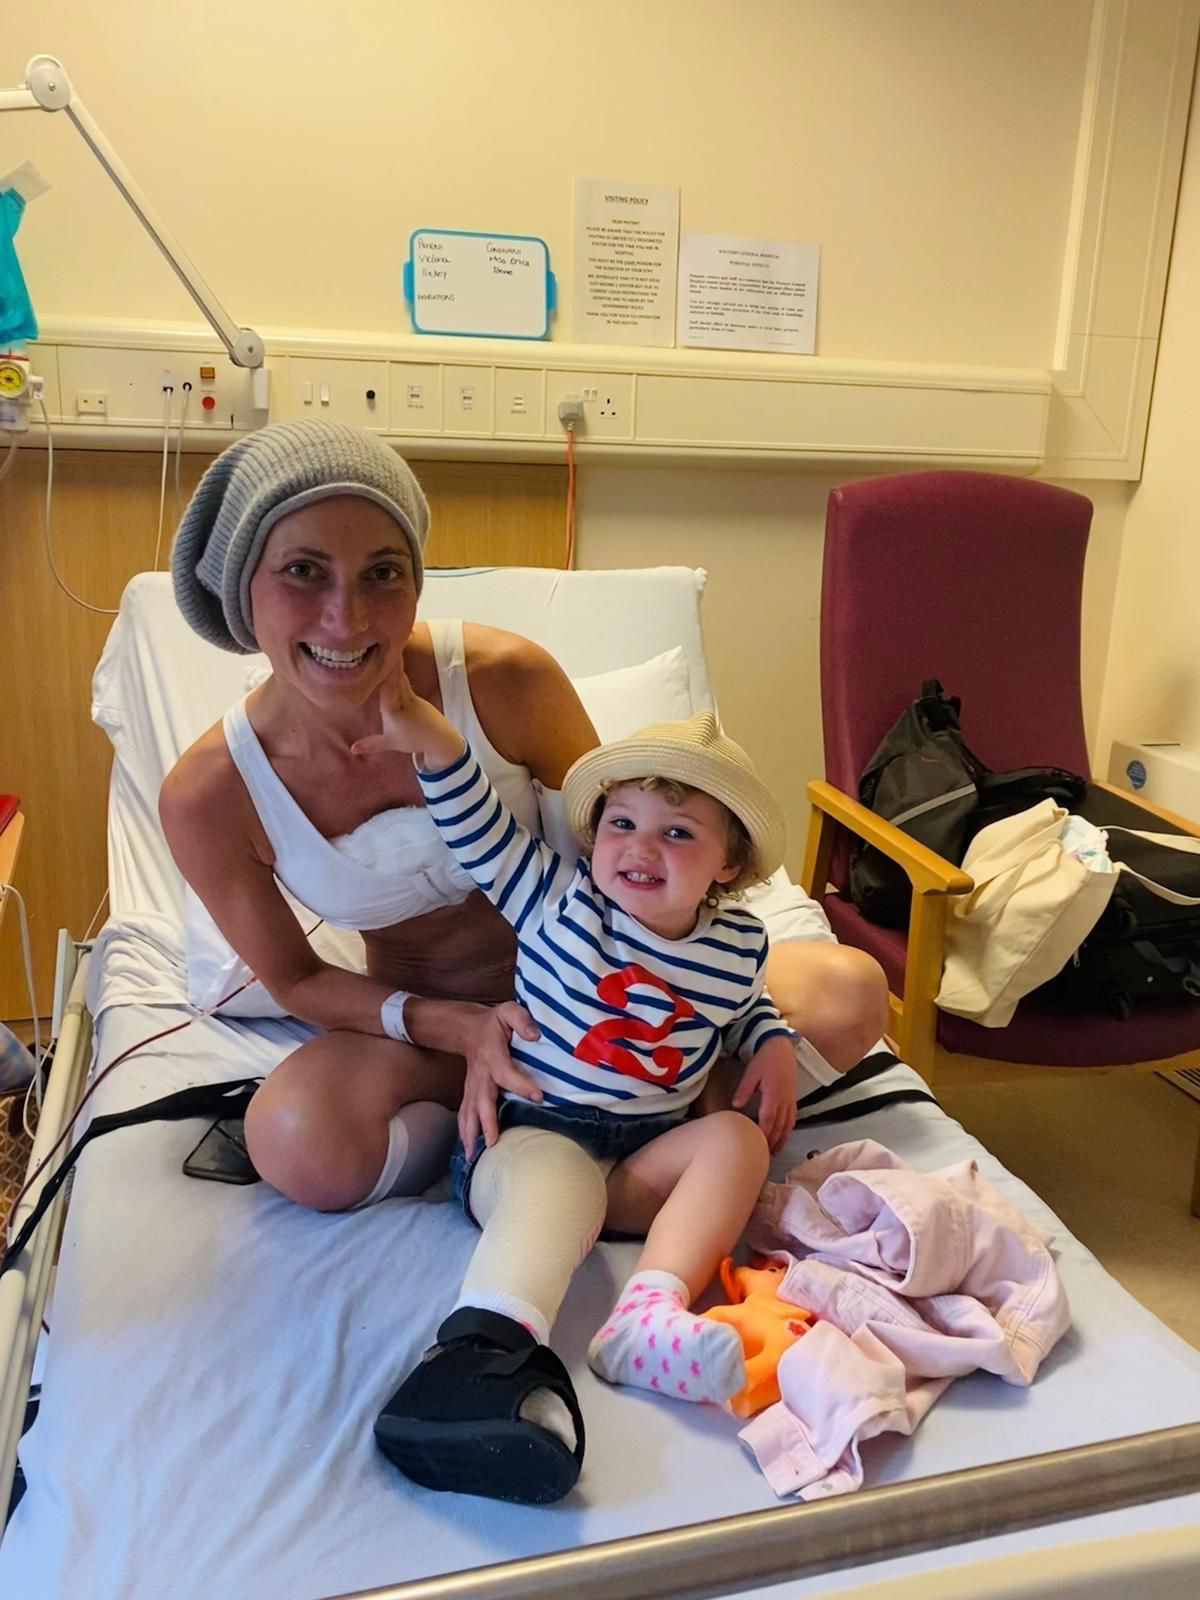 Matilda was a welcome vistior for her mum Victoria Robb during hospital treatment